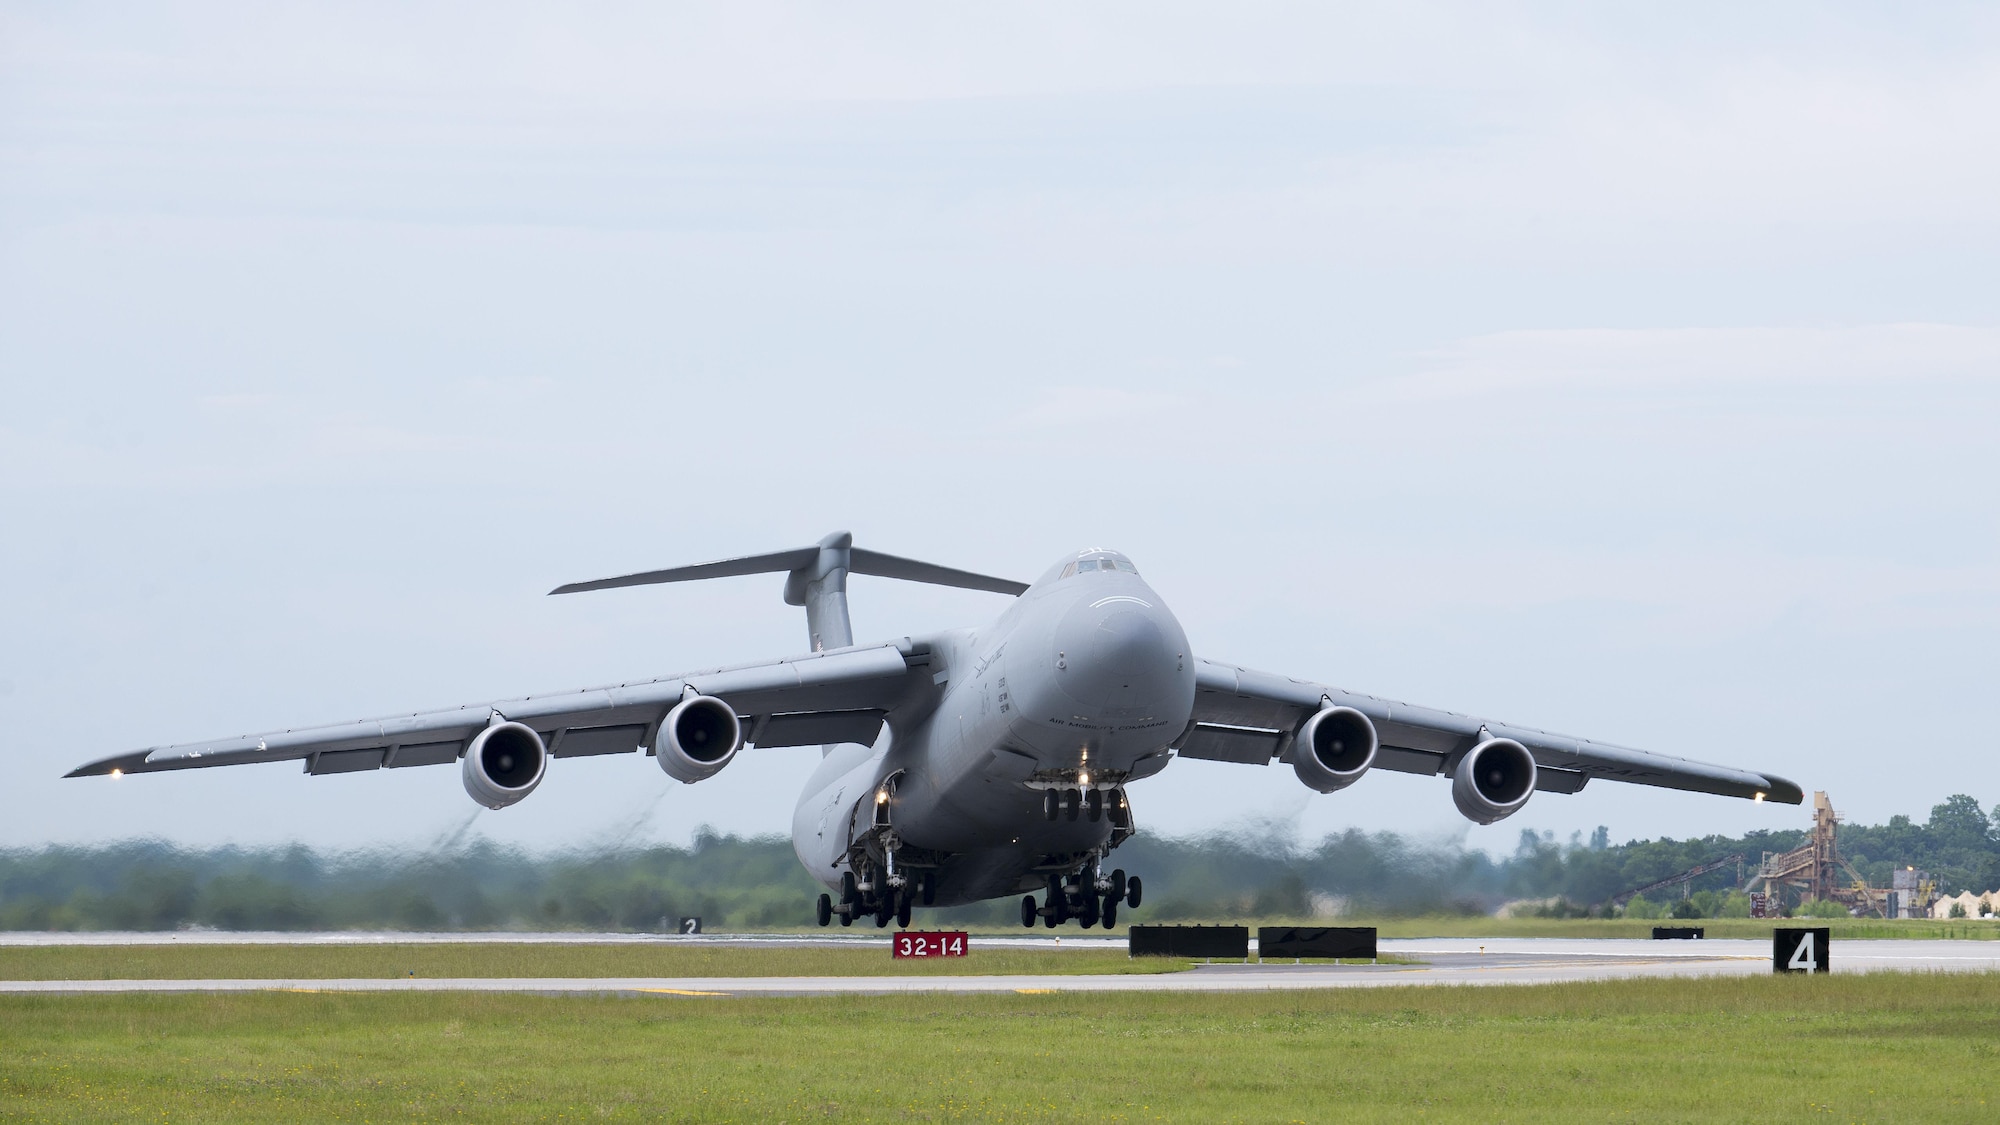 A C-5M Super Galaxy, operated by the C-5M Formal Training Unit, takes off from runway 01-19 June 8, 2017, at Dover Air Force Base, Del. The FTU, which has operated at Dover AFB since 2012, is moving its operations to Joint Base San Antonio-Lackland Kelly Field Annex, Texas. (U.S. Air Force photo by Senior Airman Zachary Cacicia)